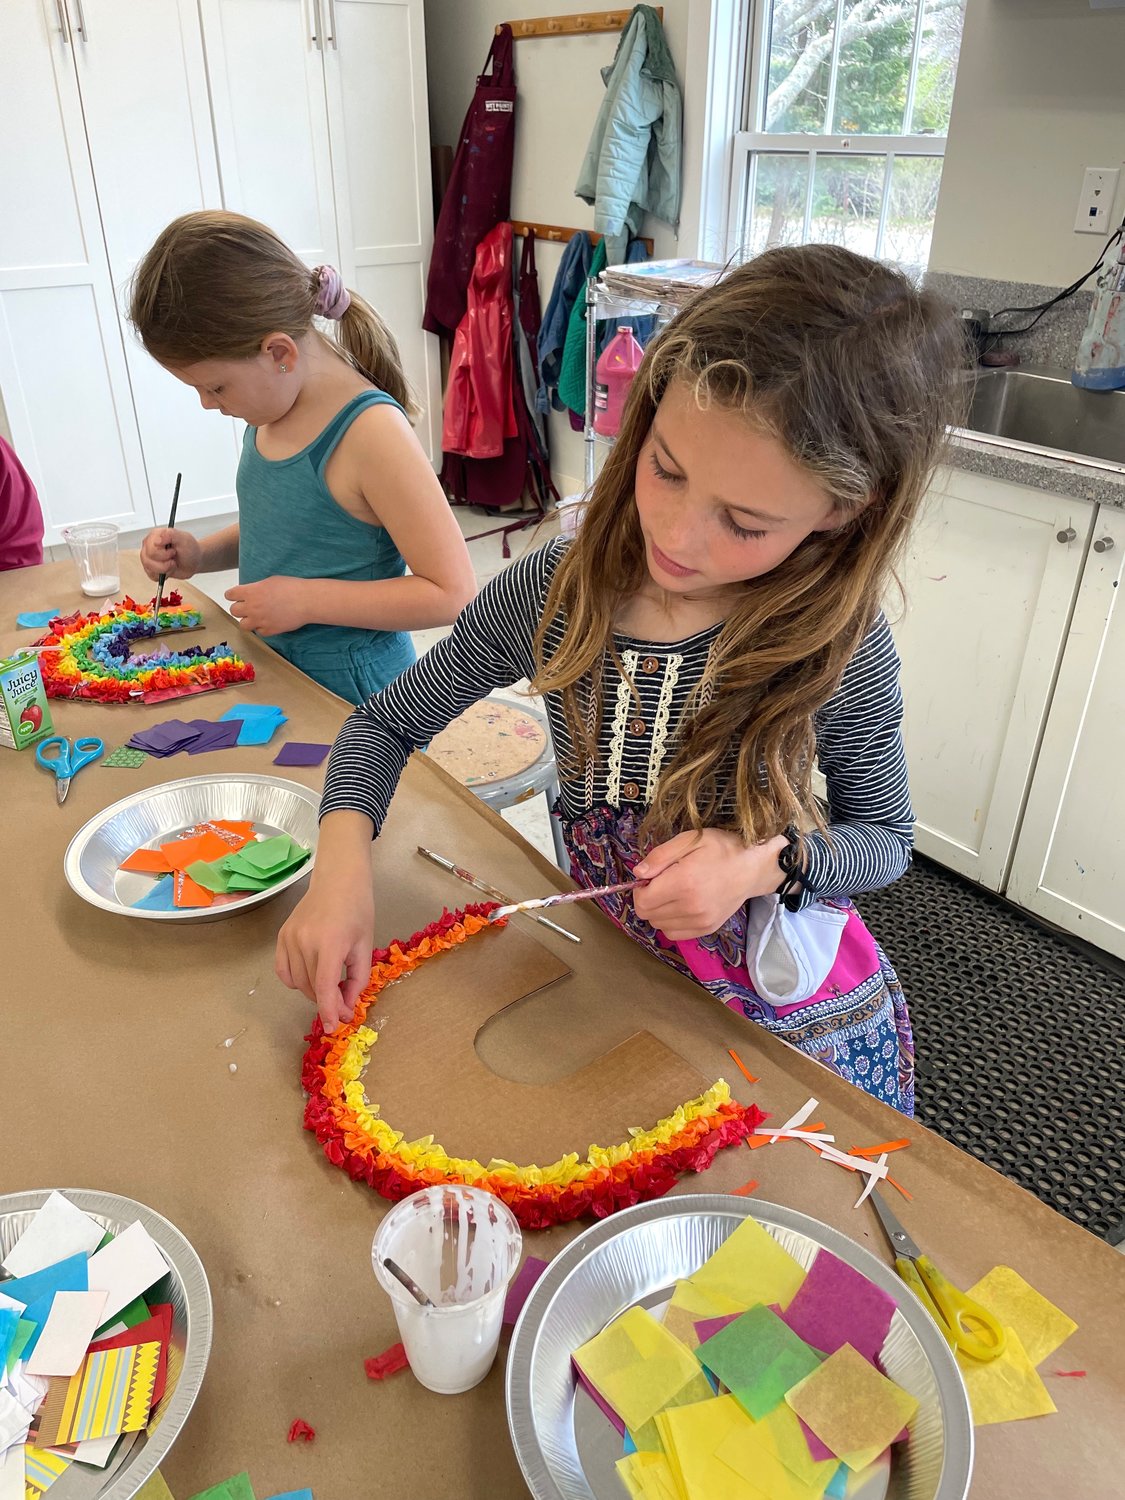 The Artists Association of Nantucket's Junior Artists Show will open Tuesday in its Big Gallery on Straight Wharf.